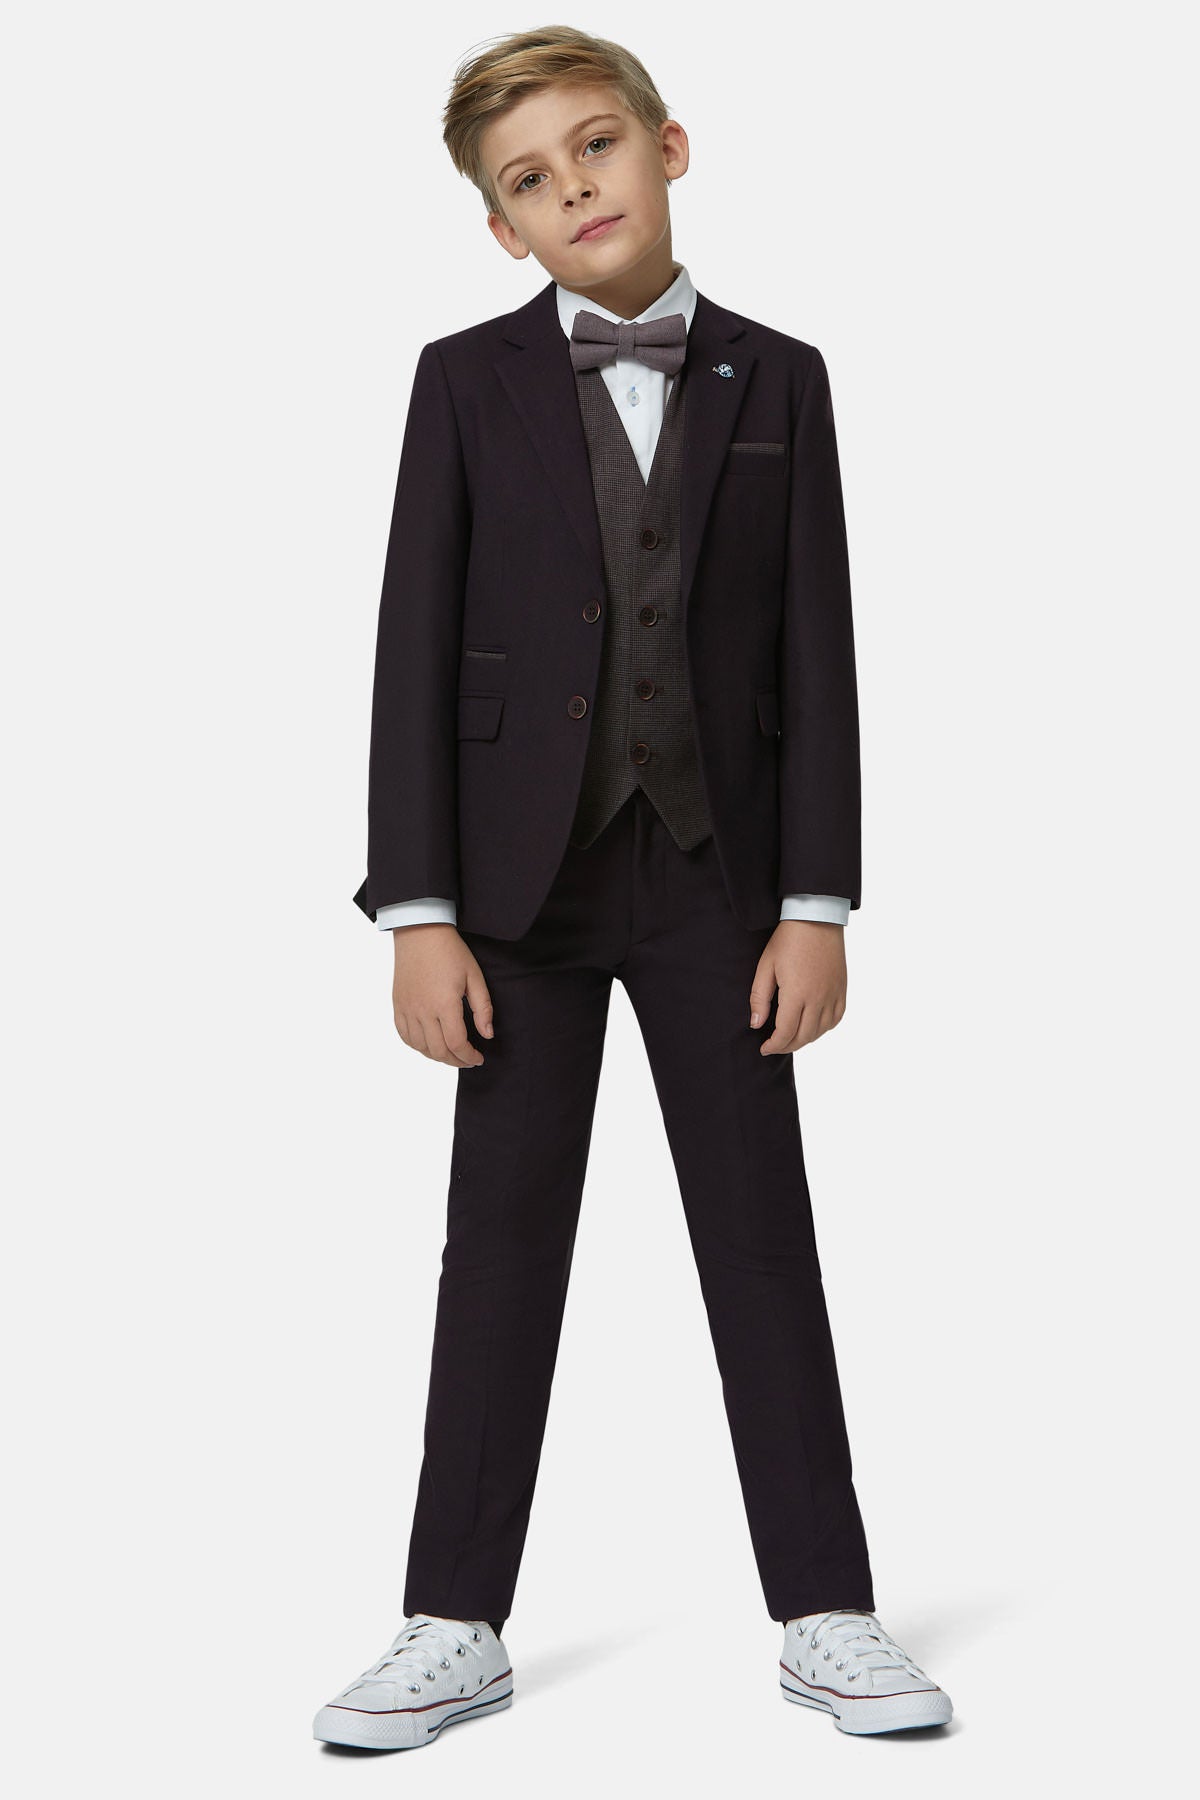 Boys Ronnie Grape 3 Piece Suit by Benetti